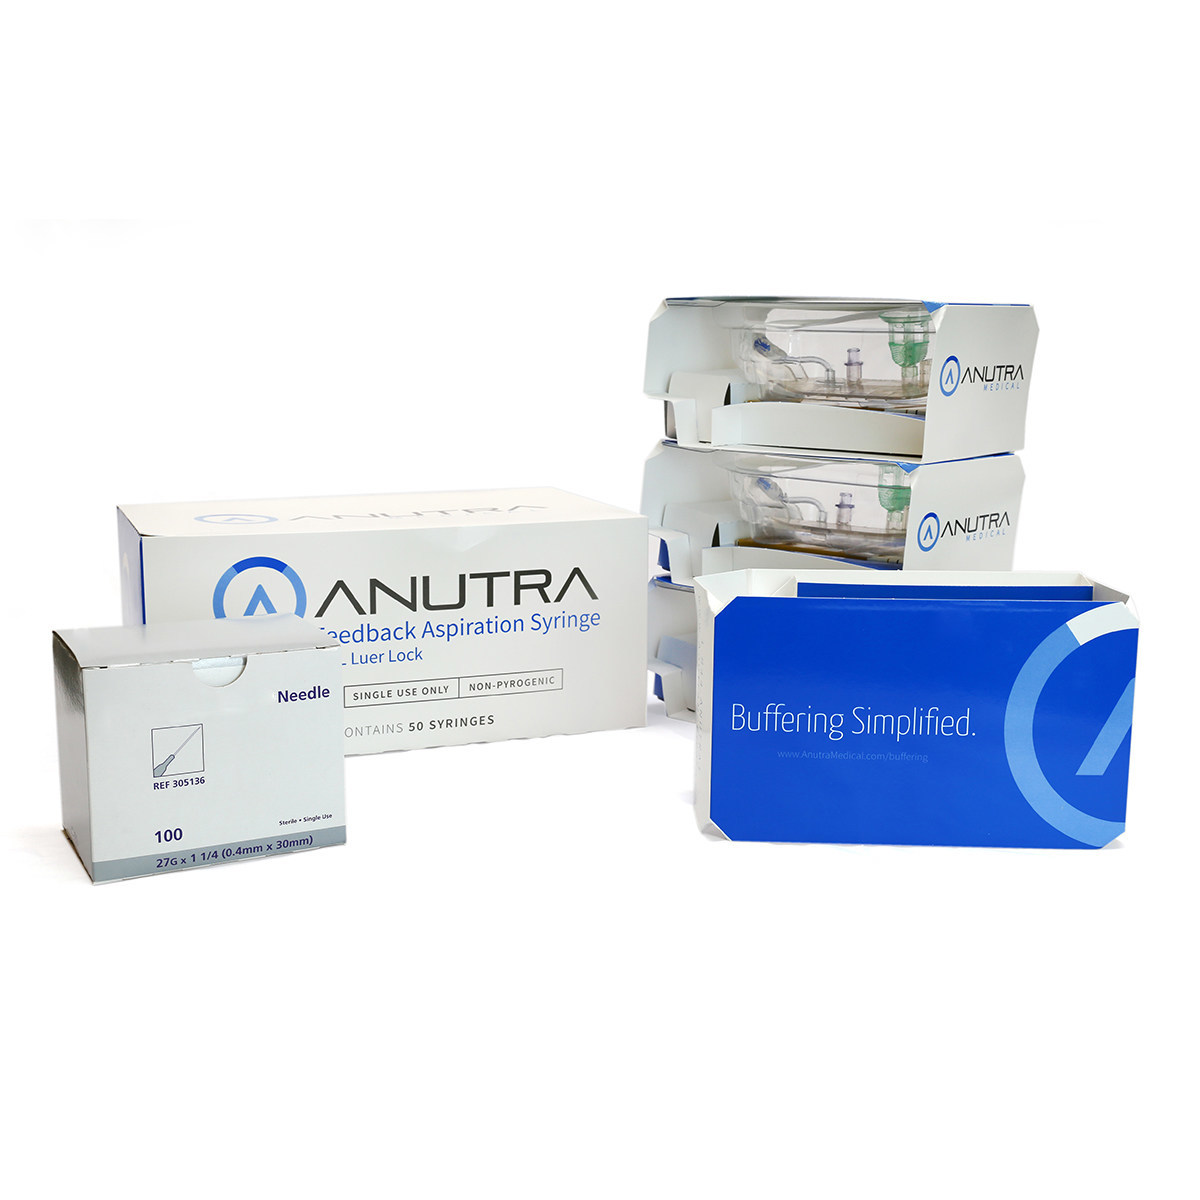 Anutra Medical adds 1% Lidocaine to its product offerings after UNC School of Dentistry published compelling studies showing advantages of using buffered 1% lidocaine.